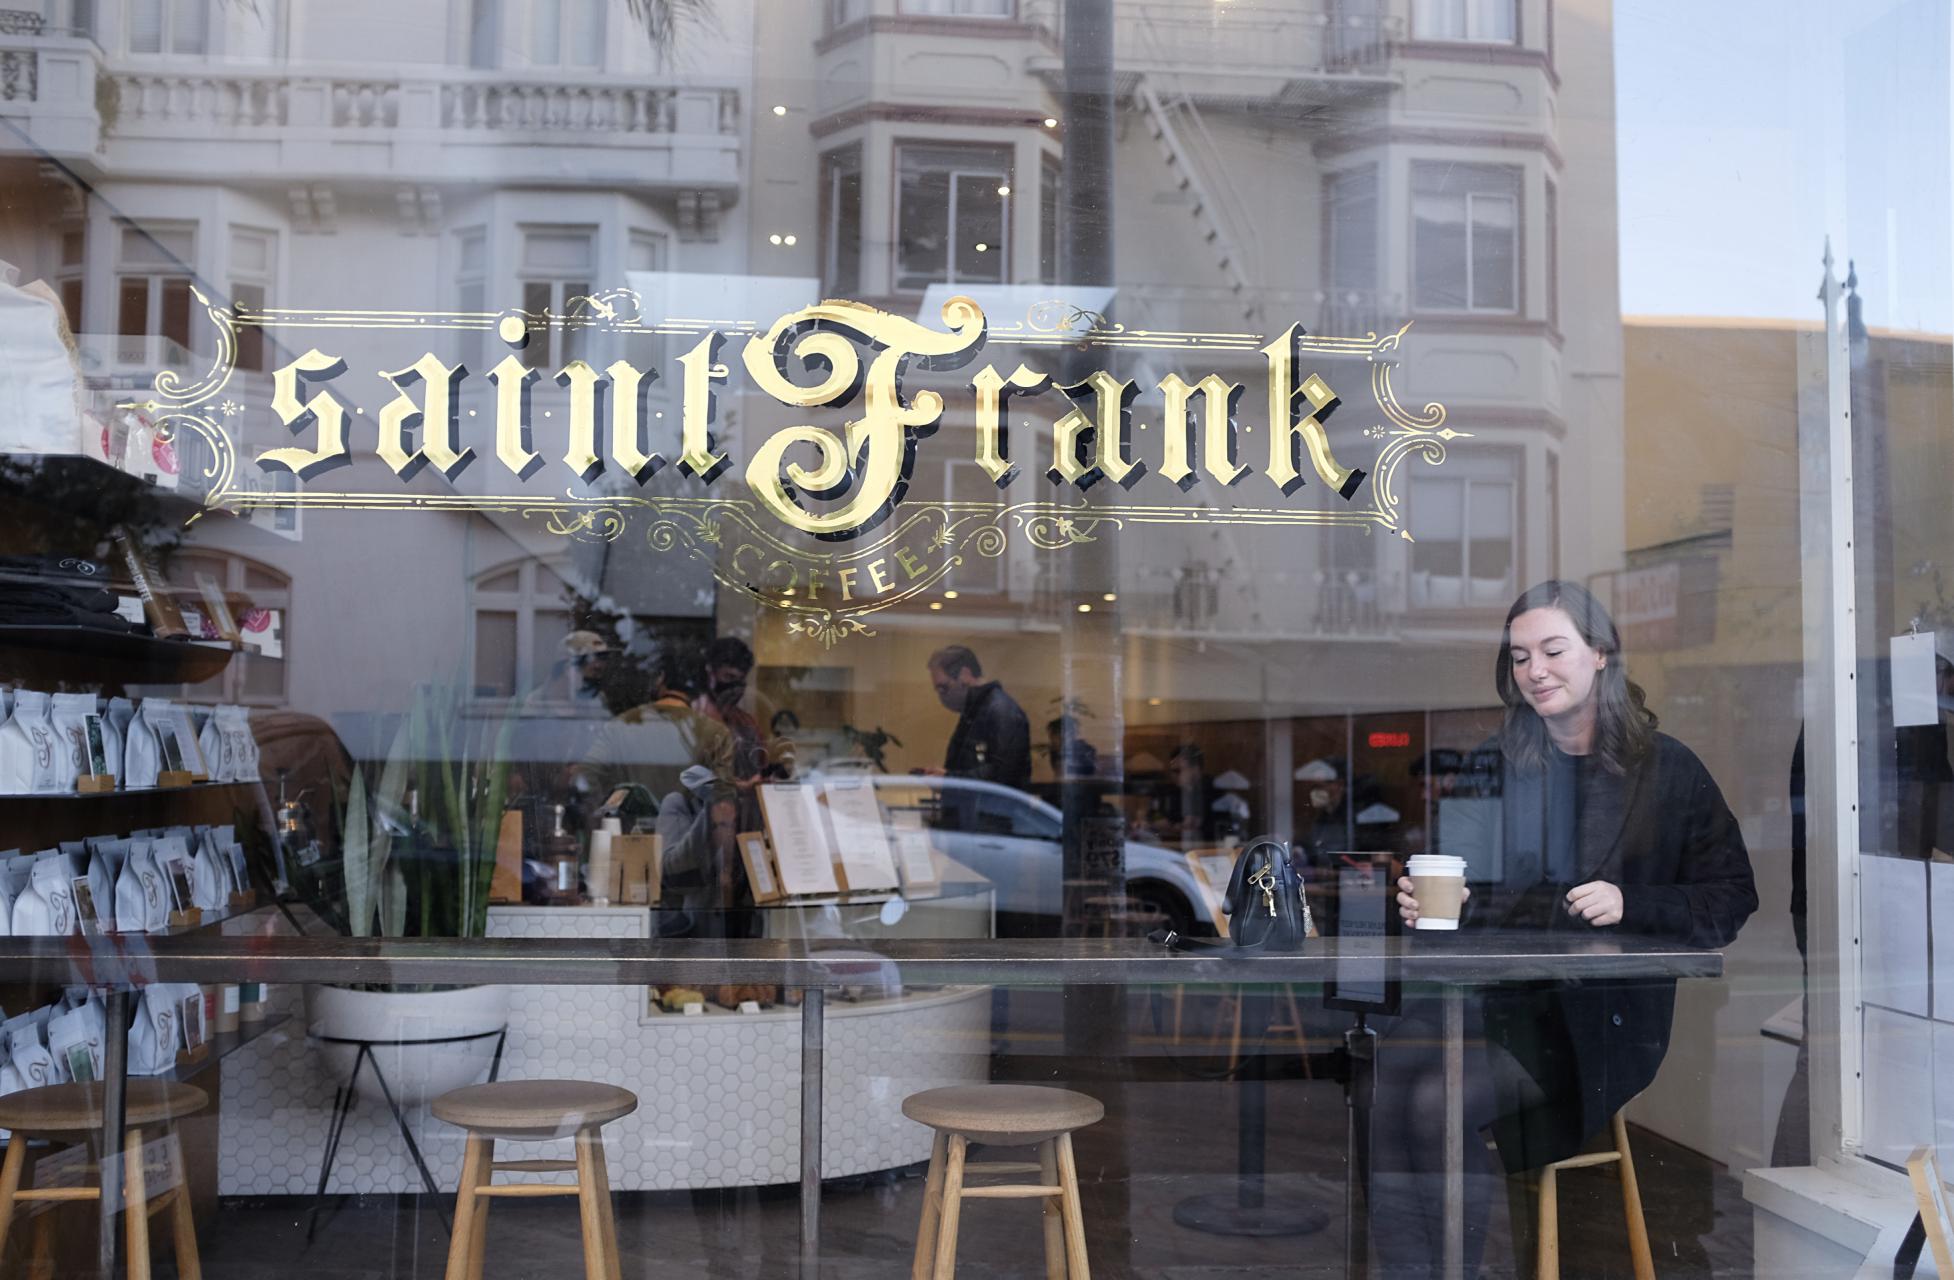 Alyssa sits in the window of Saint Frank, with a cup of coffee